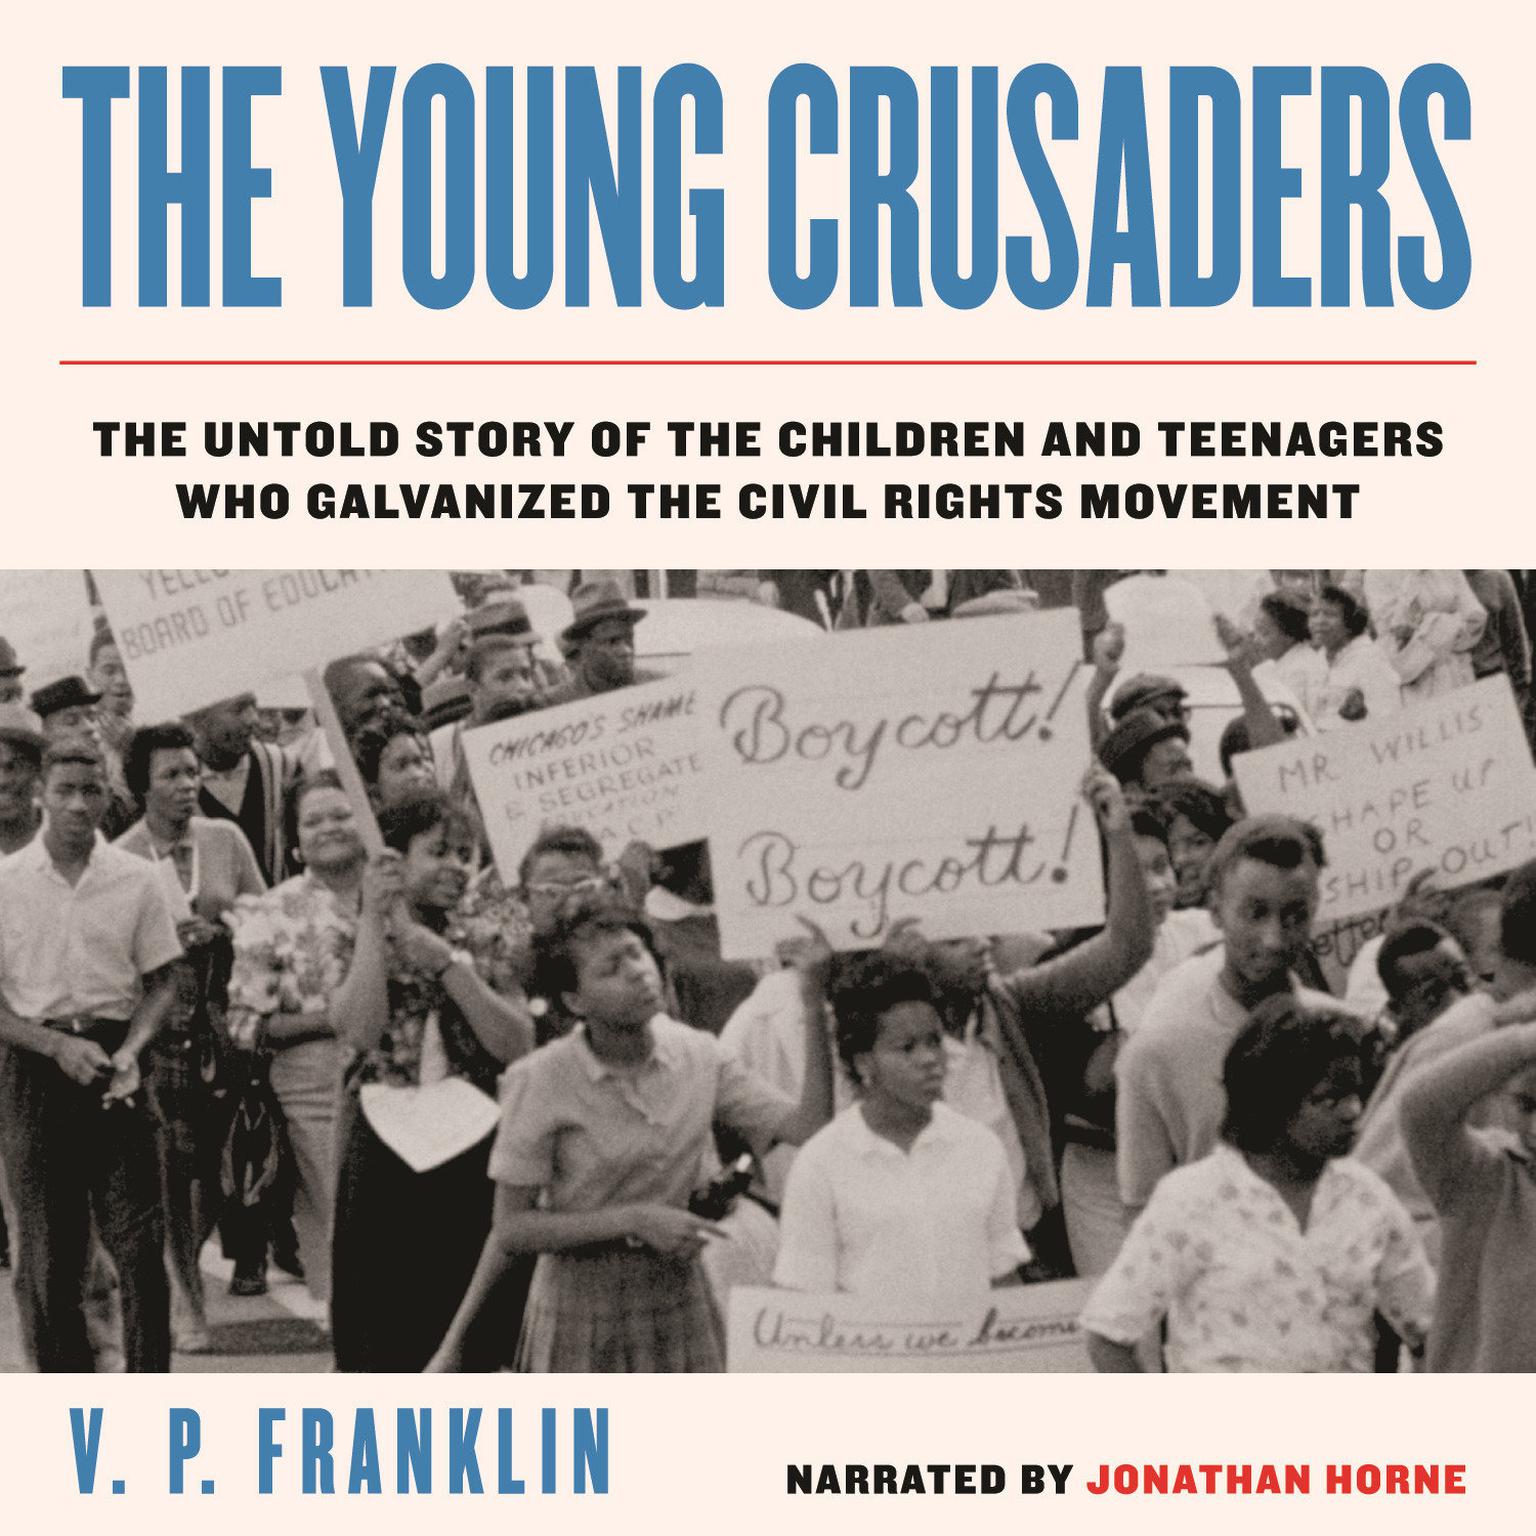 The Young Crusaders: The Untold Story of the Children and Teenagers Who Galvanized the Civil Rights Movement Audiobook, by V. P. Franklin